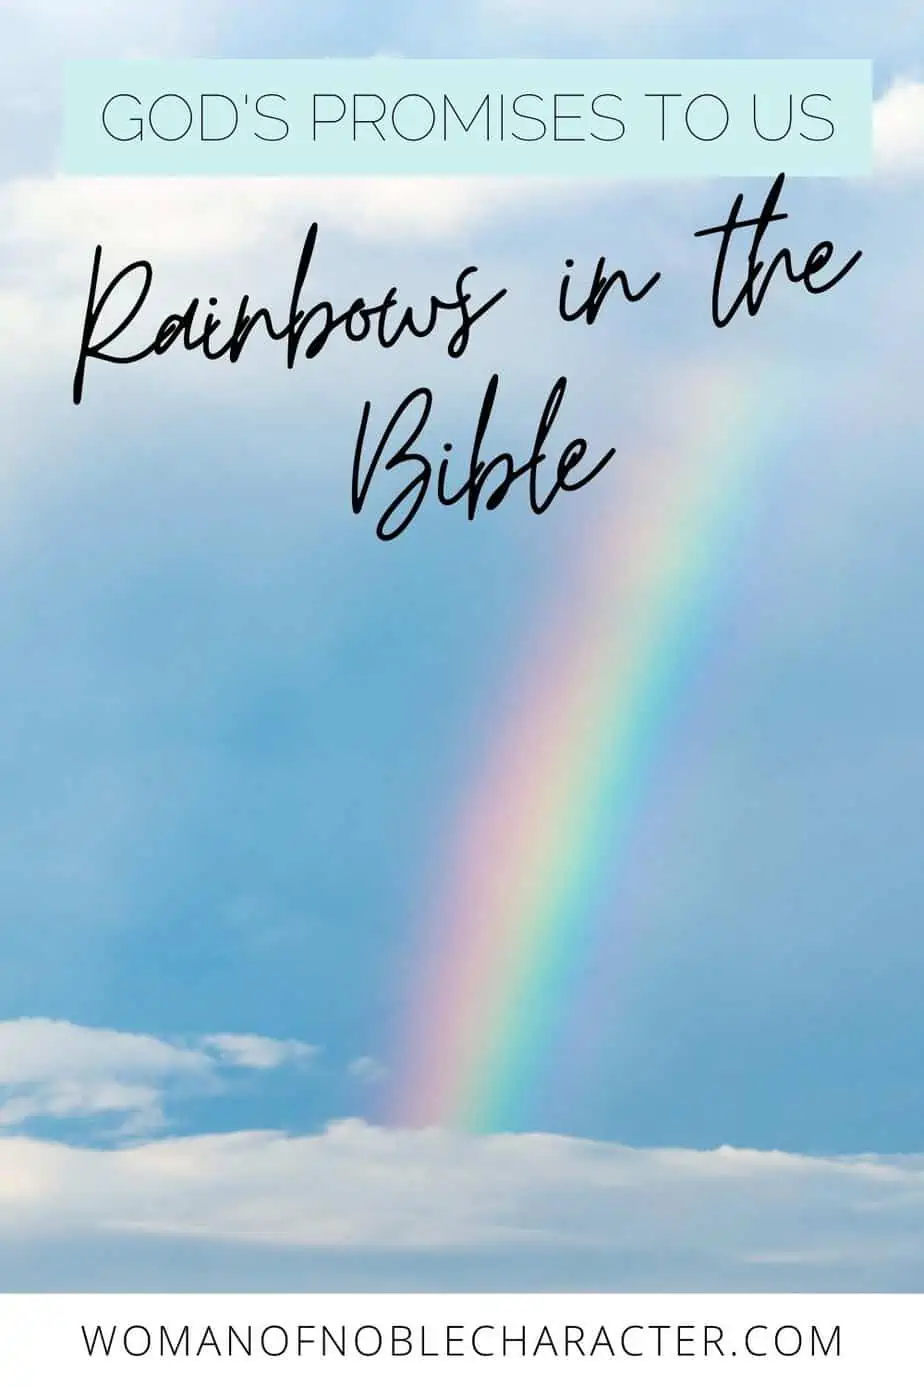 imge of rainbow in clouds for the post Three Rainbows In The Bible: 3 of God's Awe-Inspiring Promises to His Children